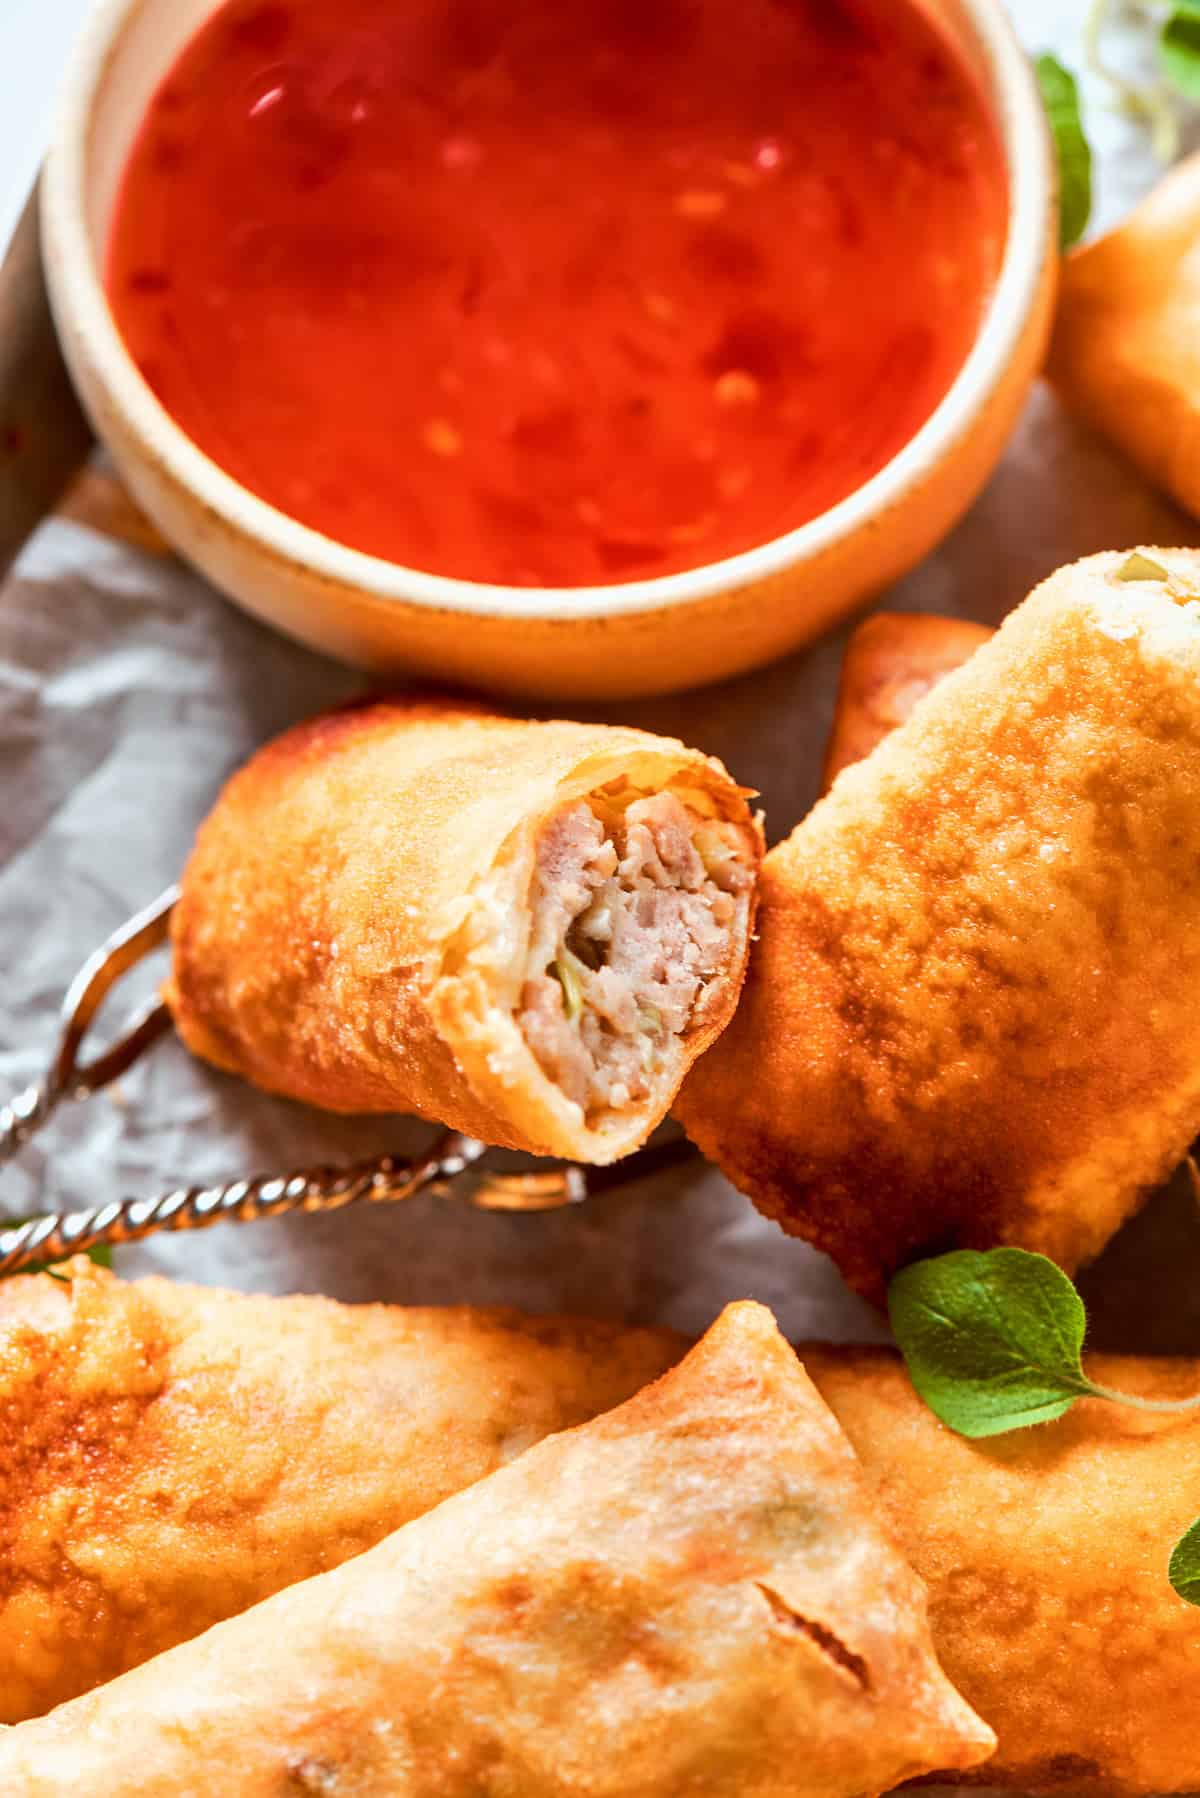 Crisp chicken egg rolls and a bowl of red sauce.